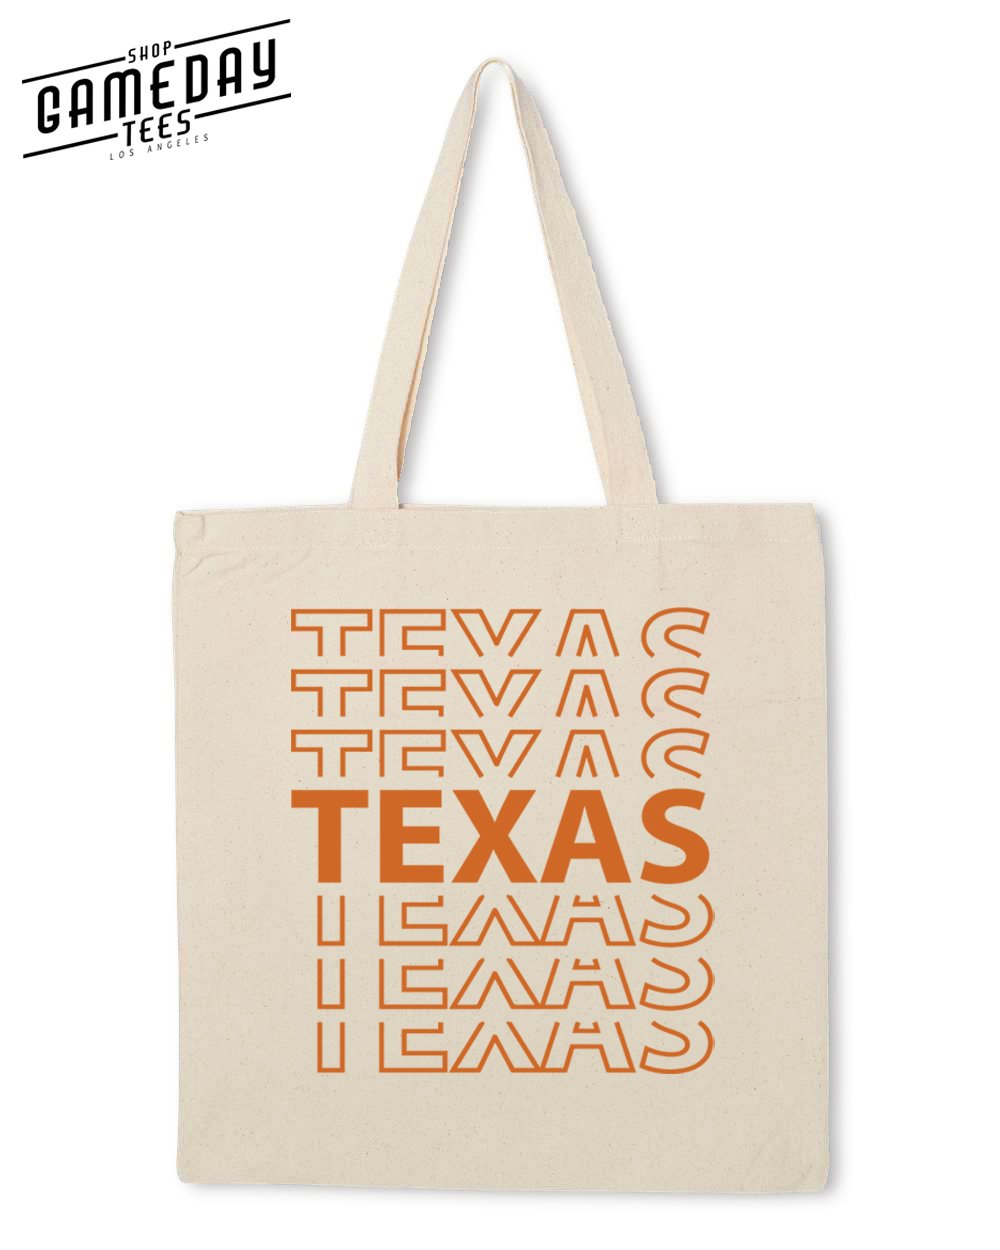 University Of Texas College Gameday Tees Oklahoma State Casual Wide Canvas Bag Collection Premium High Quality Tote Bag Game Day UT Bag Shop Gameday Tees University Of Texas Collection Image Natural 1